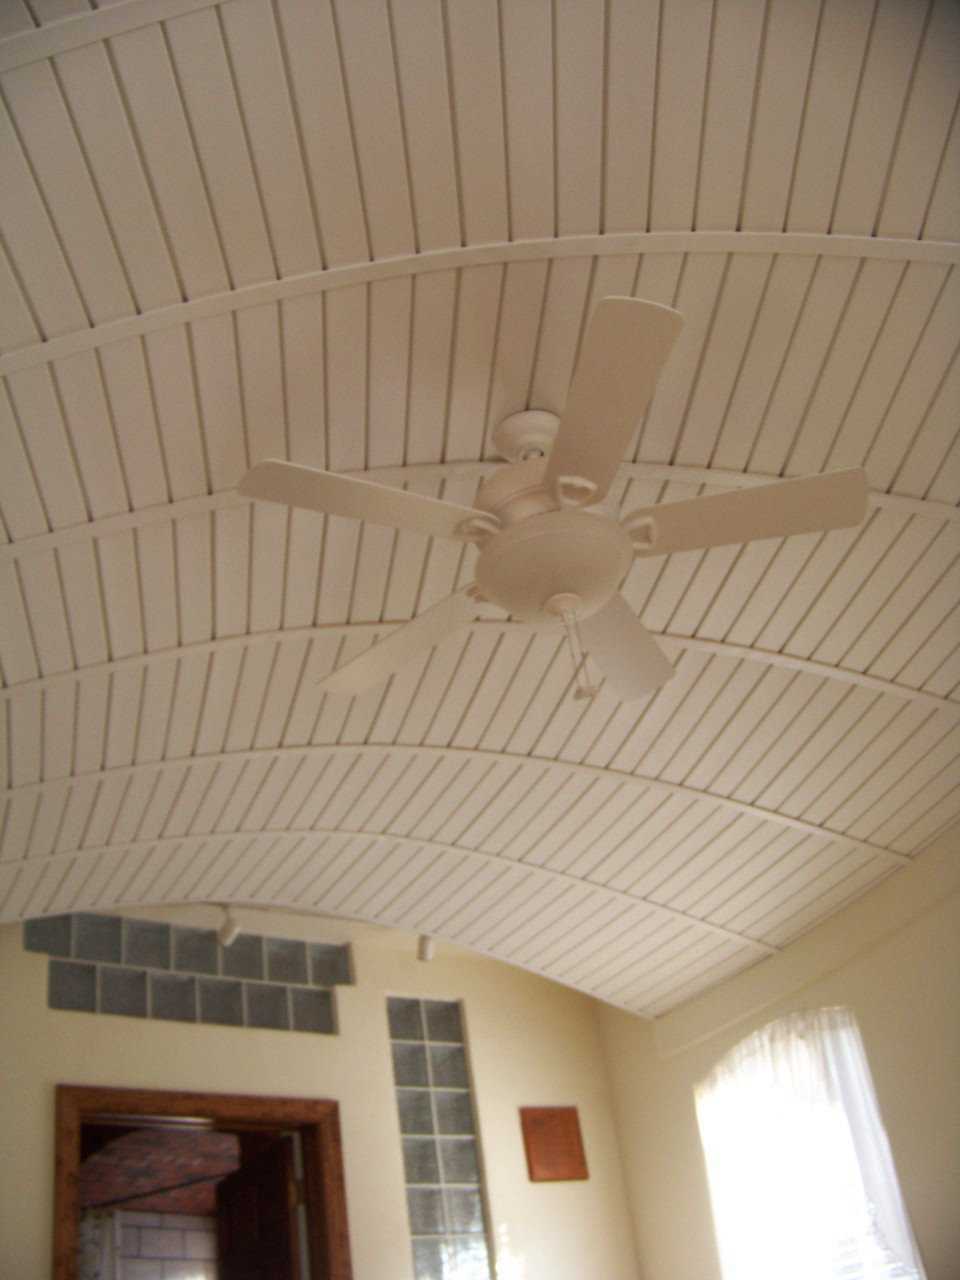 Cool! — The fan contributes comfort while the ceiling it hangs from contributes beauty.